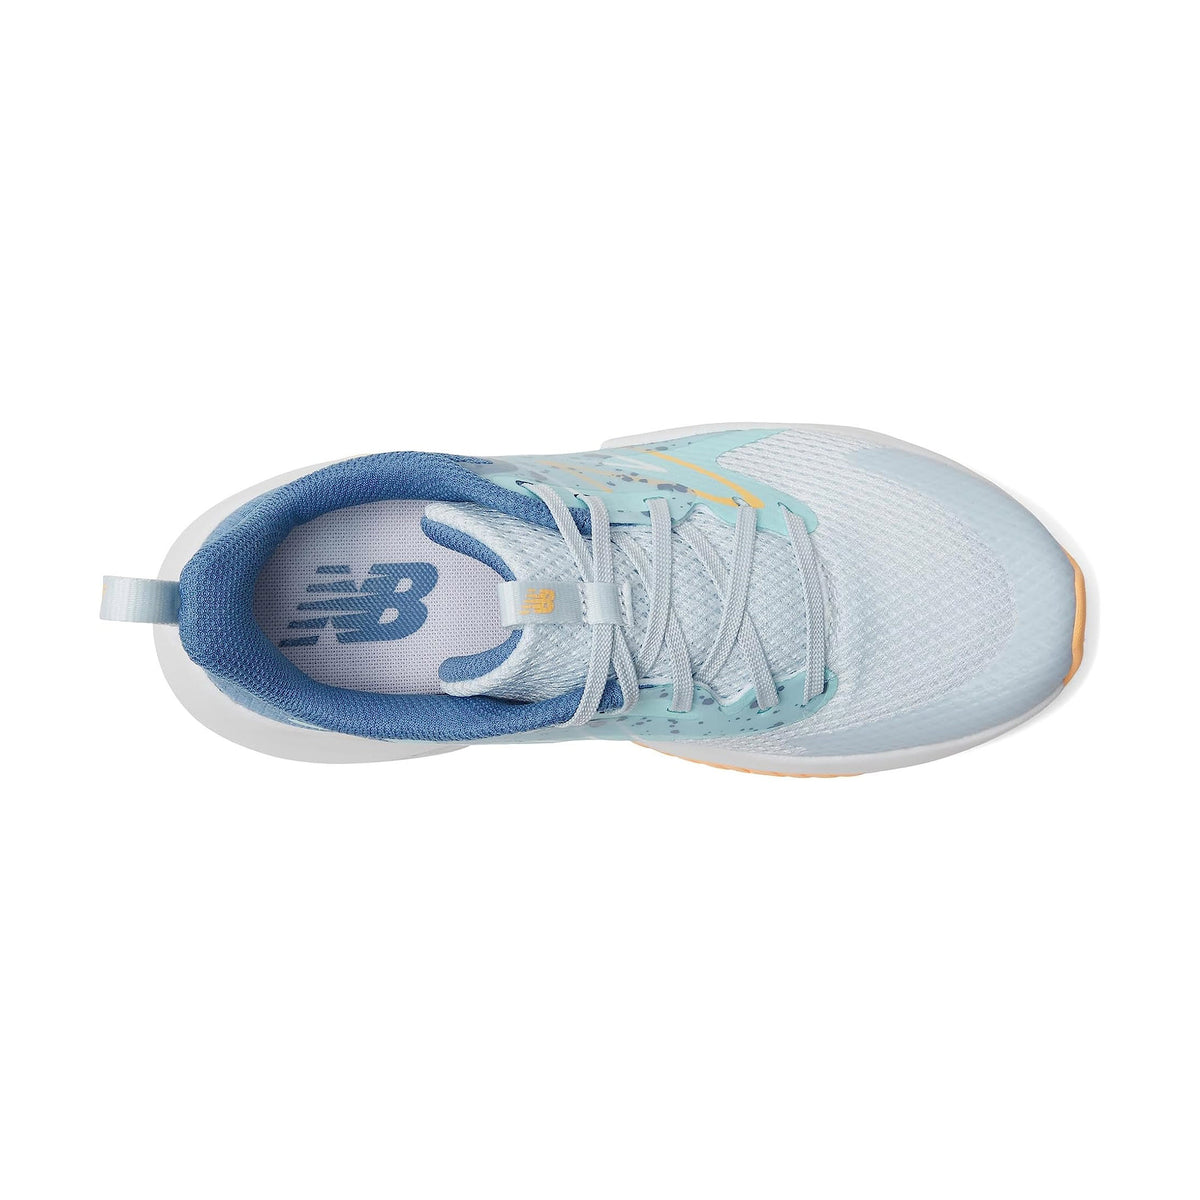 Top view of a light blue and white New Balance Rave Run v2 kids’ running shoe with a yellow sole accent. 

Replace with:
Top view of a light blue and white NEW BALANCE RAVE RUN V2 ICE BLUE - KIDS kids’ running shoe with a yellow sole accent.